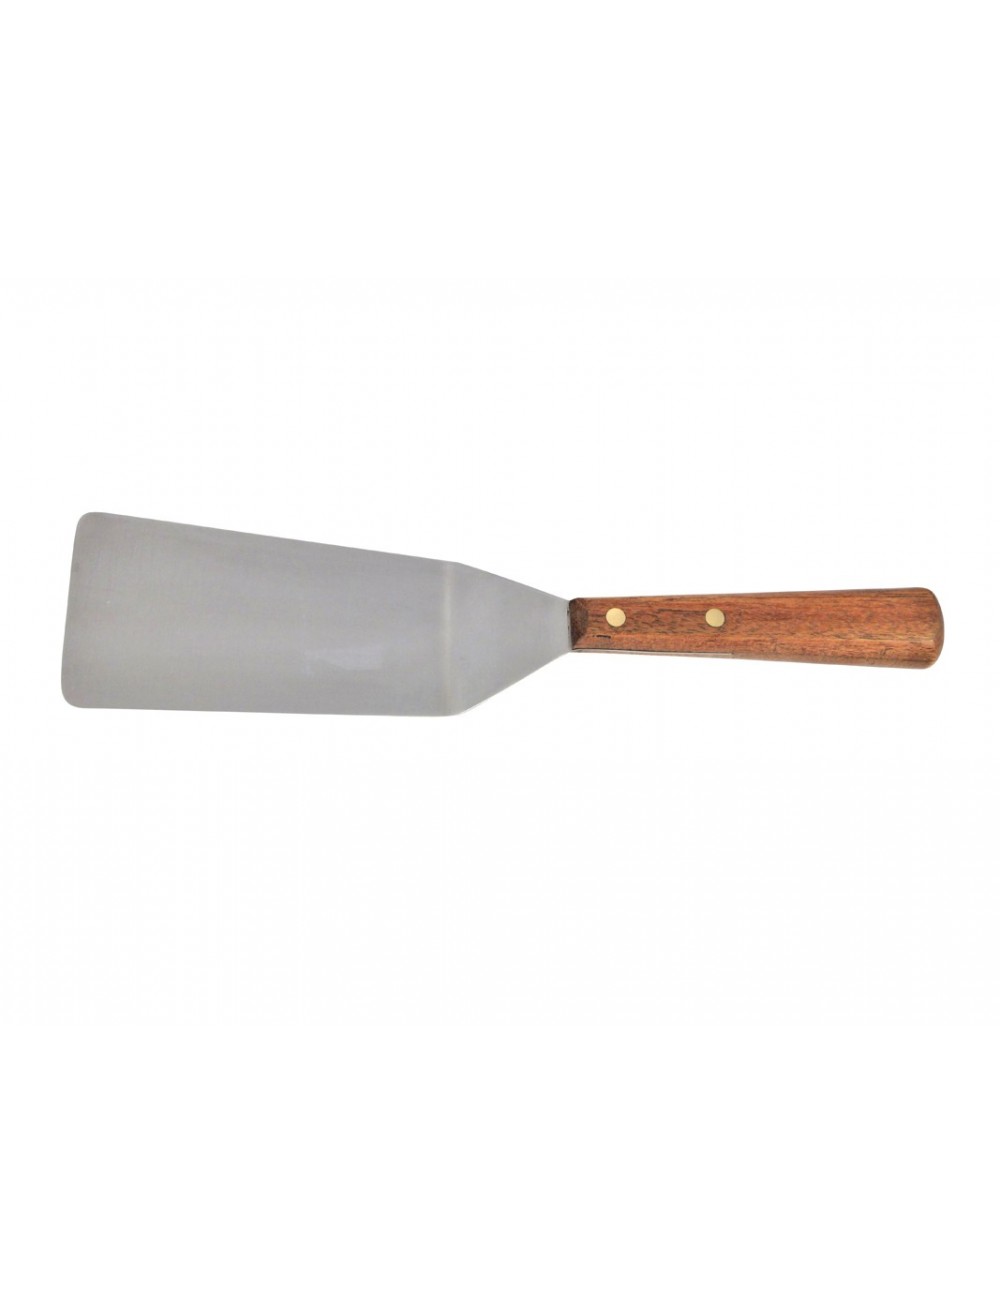 STAINLESS STEEL CURVED SPATULA - 15 CM